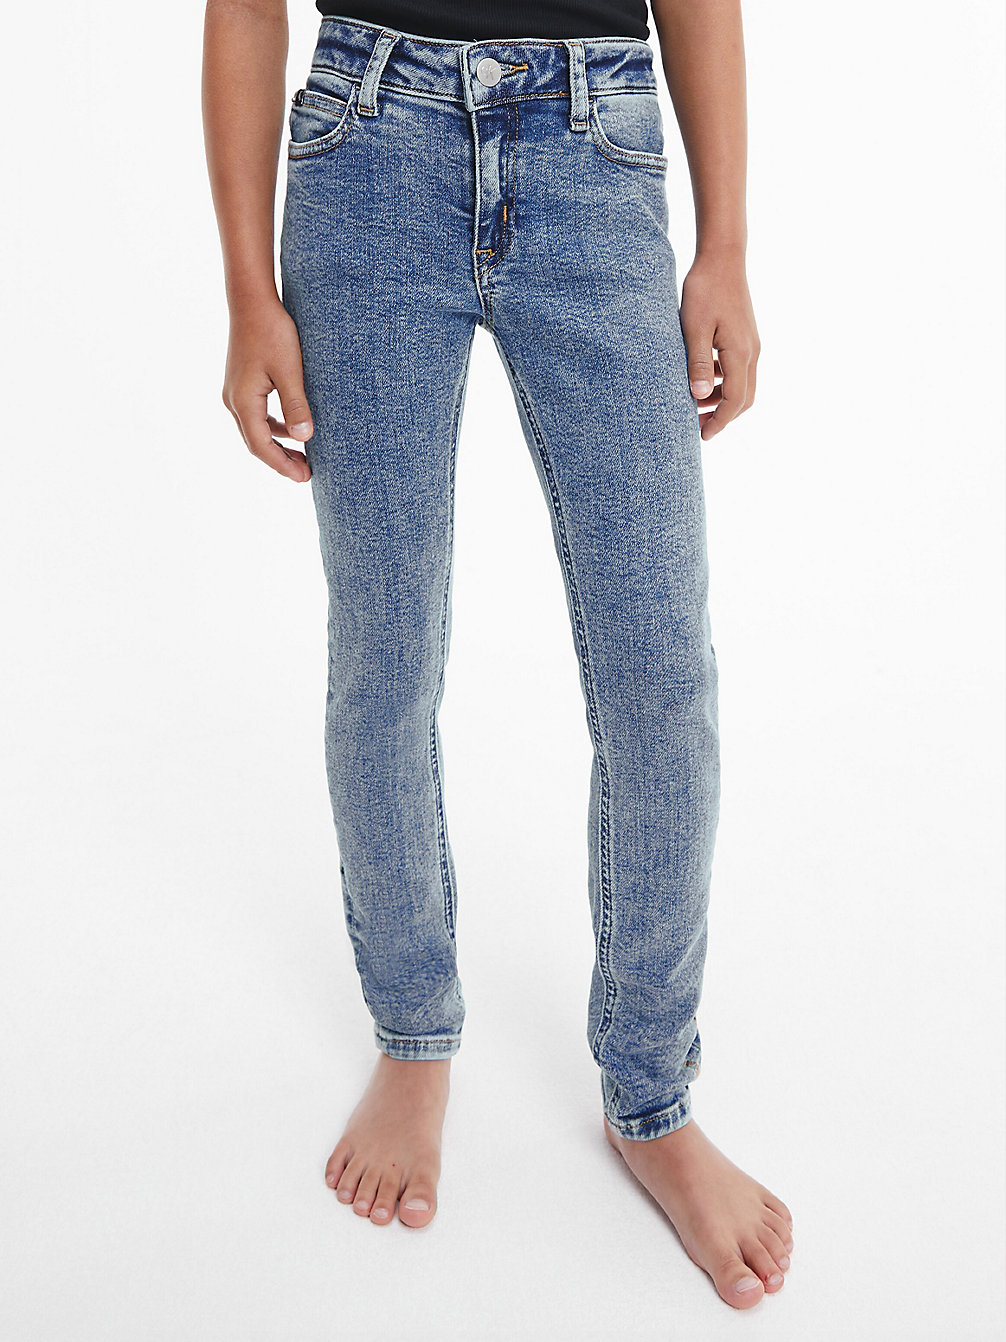 Mid Rise Skinny Jeans > STONE WASH MID BLUE > undefined girls > Calvin Klein